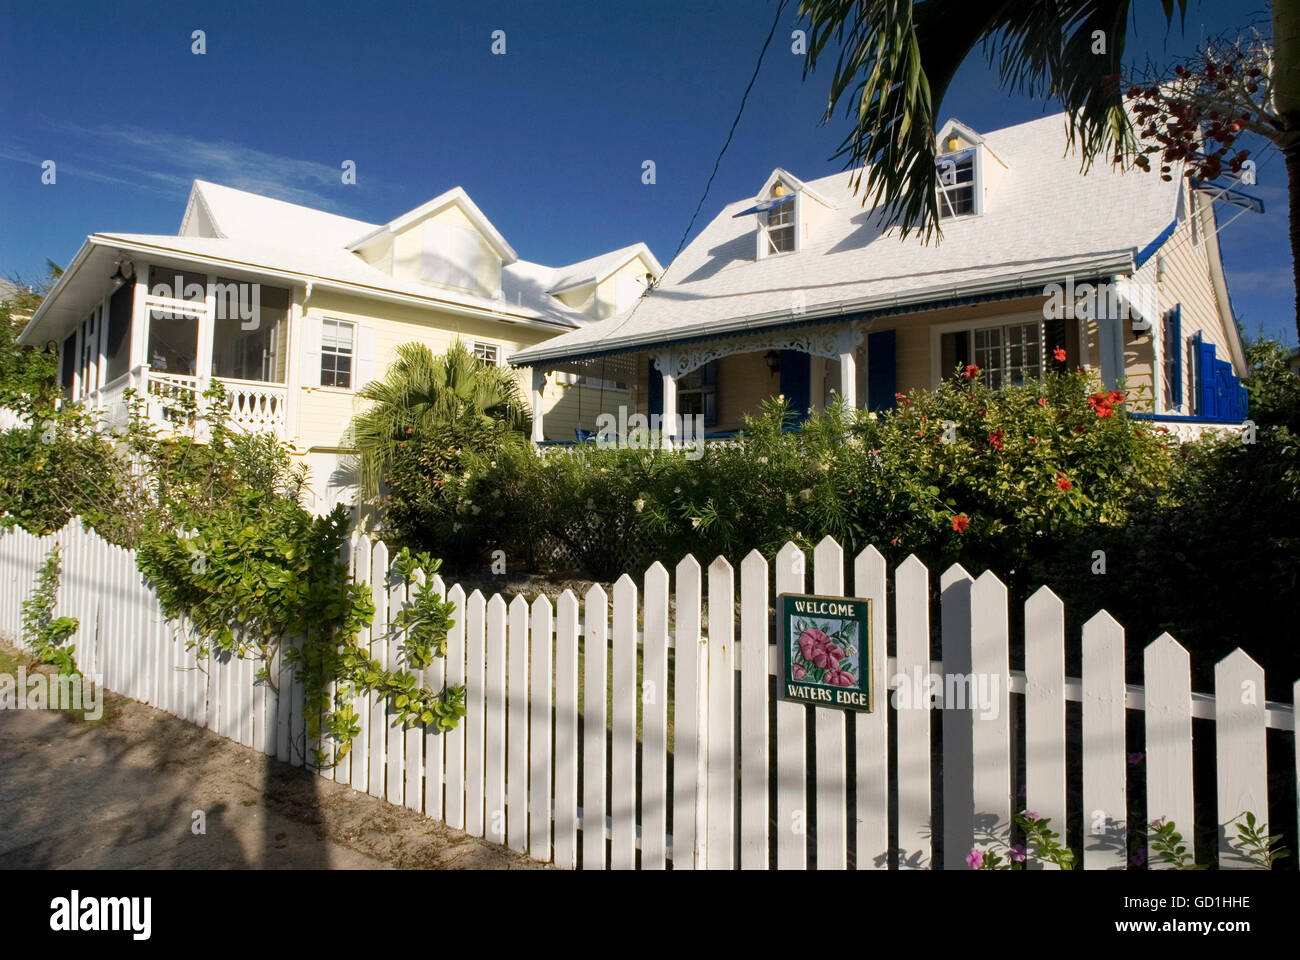 Typical loyalist house, Hope Town, Elbow Cay, Abacos. Bahamas Stock Photo